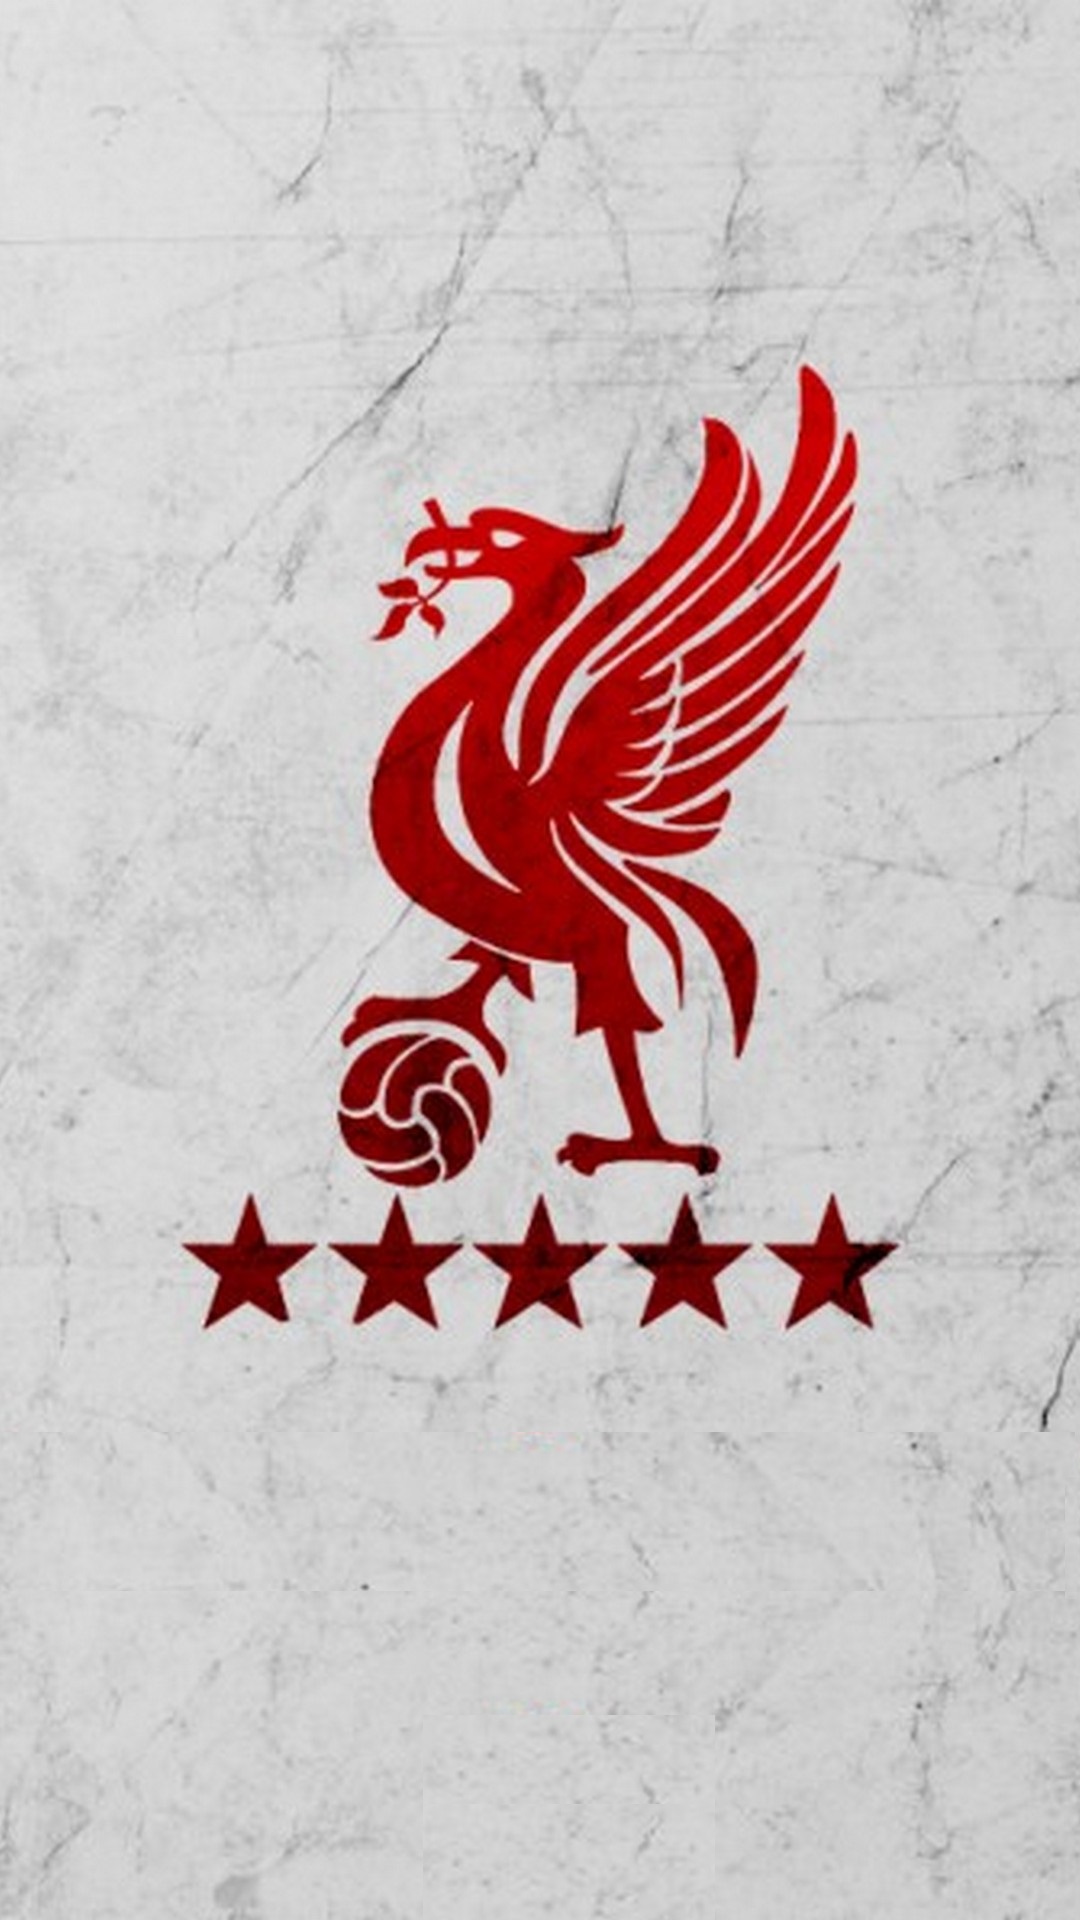 Liverpool Wallpaper For Phone Hd With High-resolution - Liver Bird With 6 Stars - HD Wallpaper 